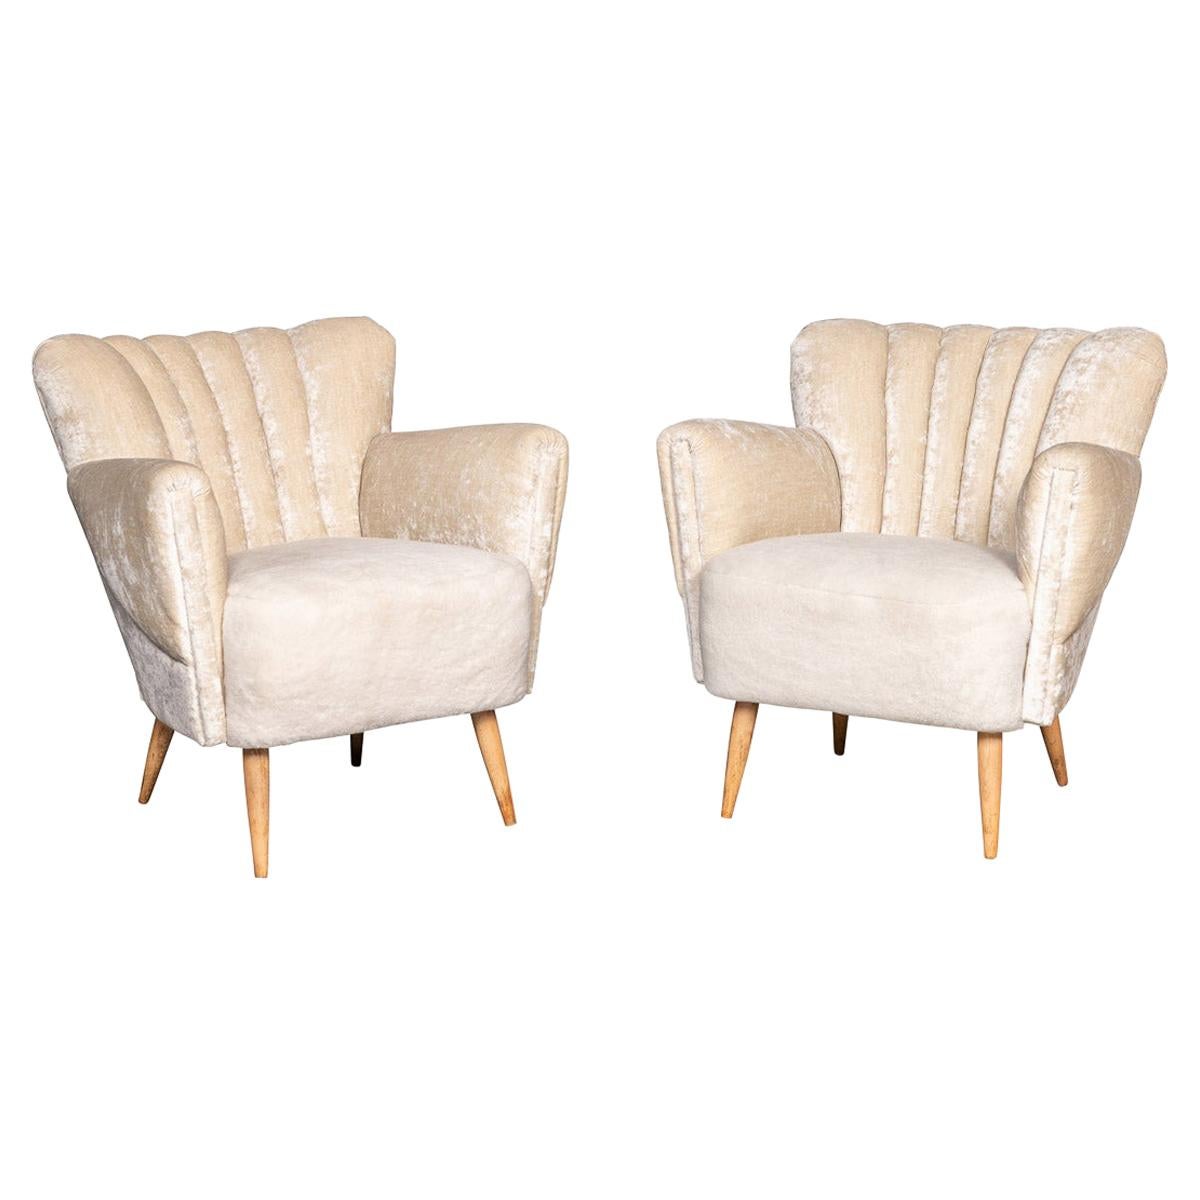 20th Century Pair of Boudoir Shell-Back Chairs, c.1950